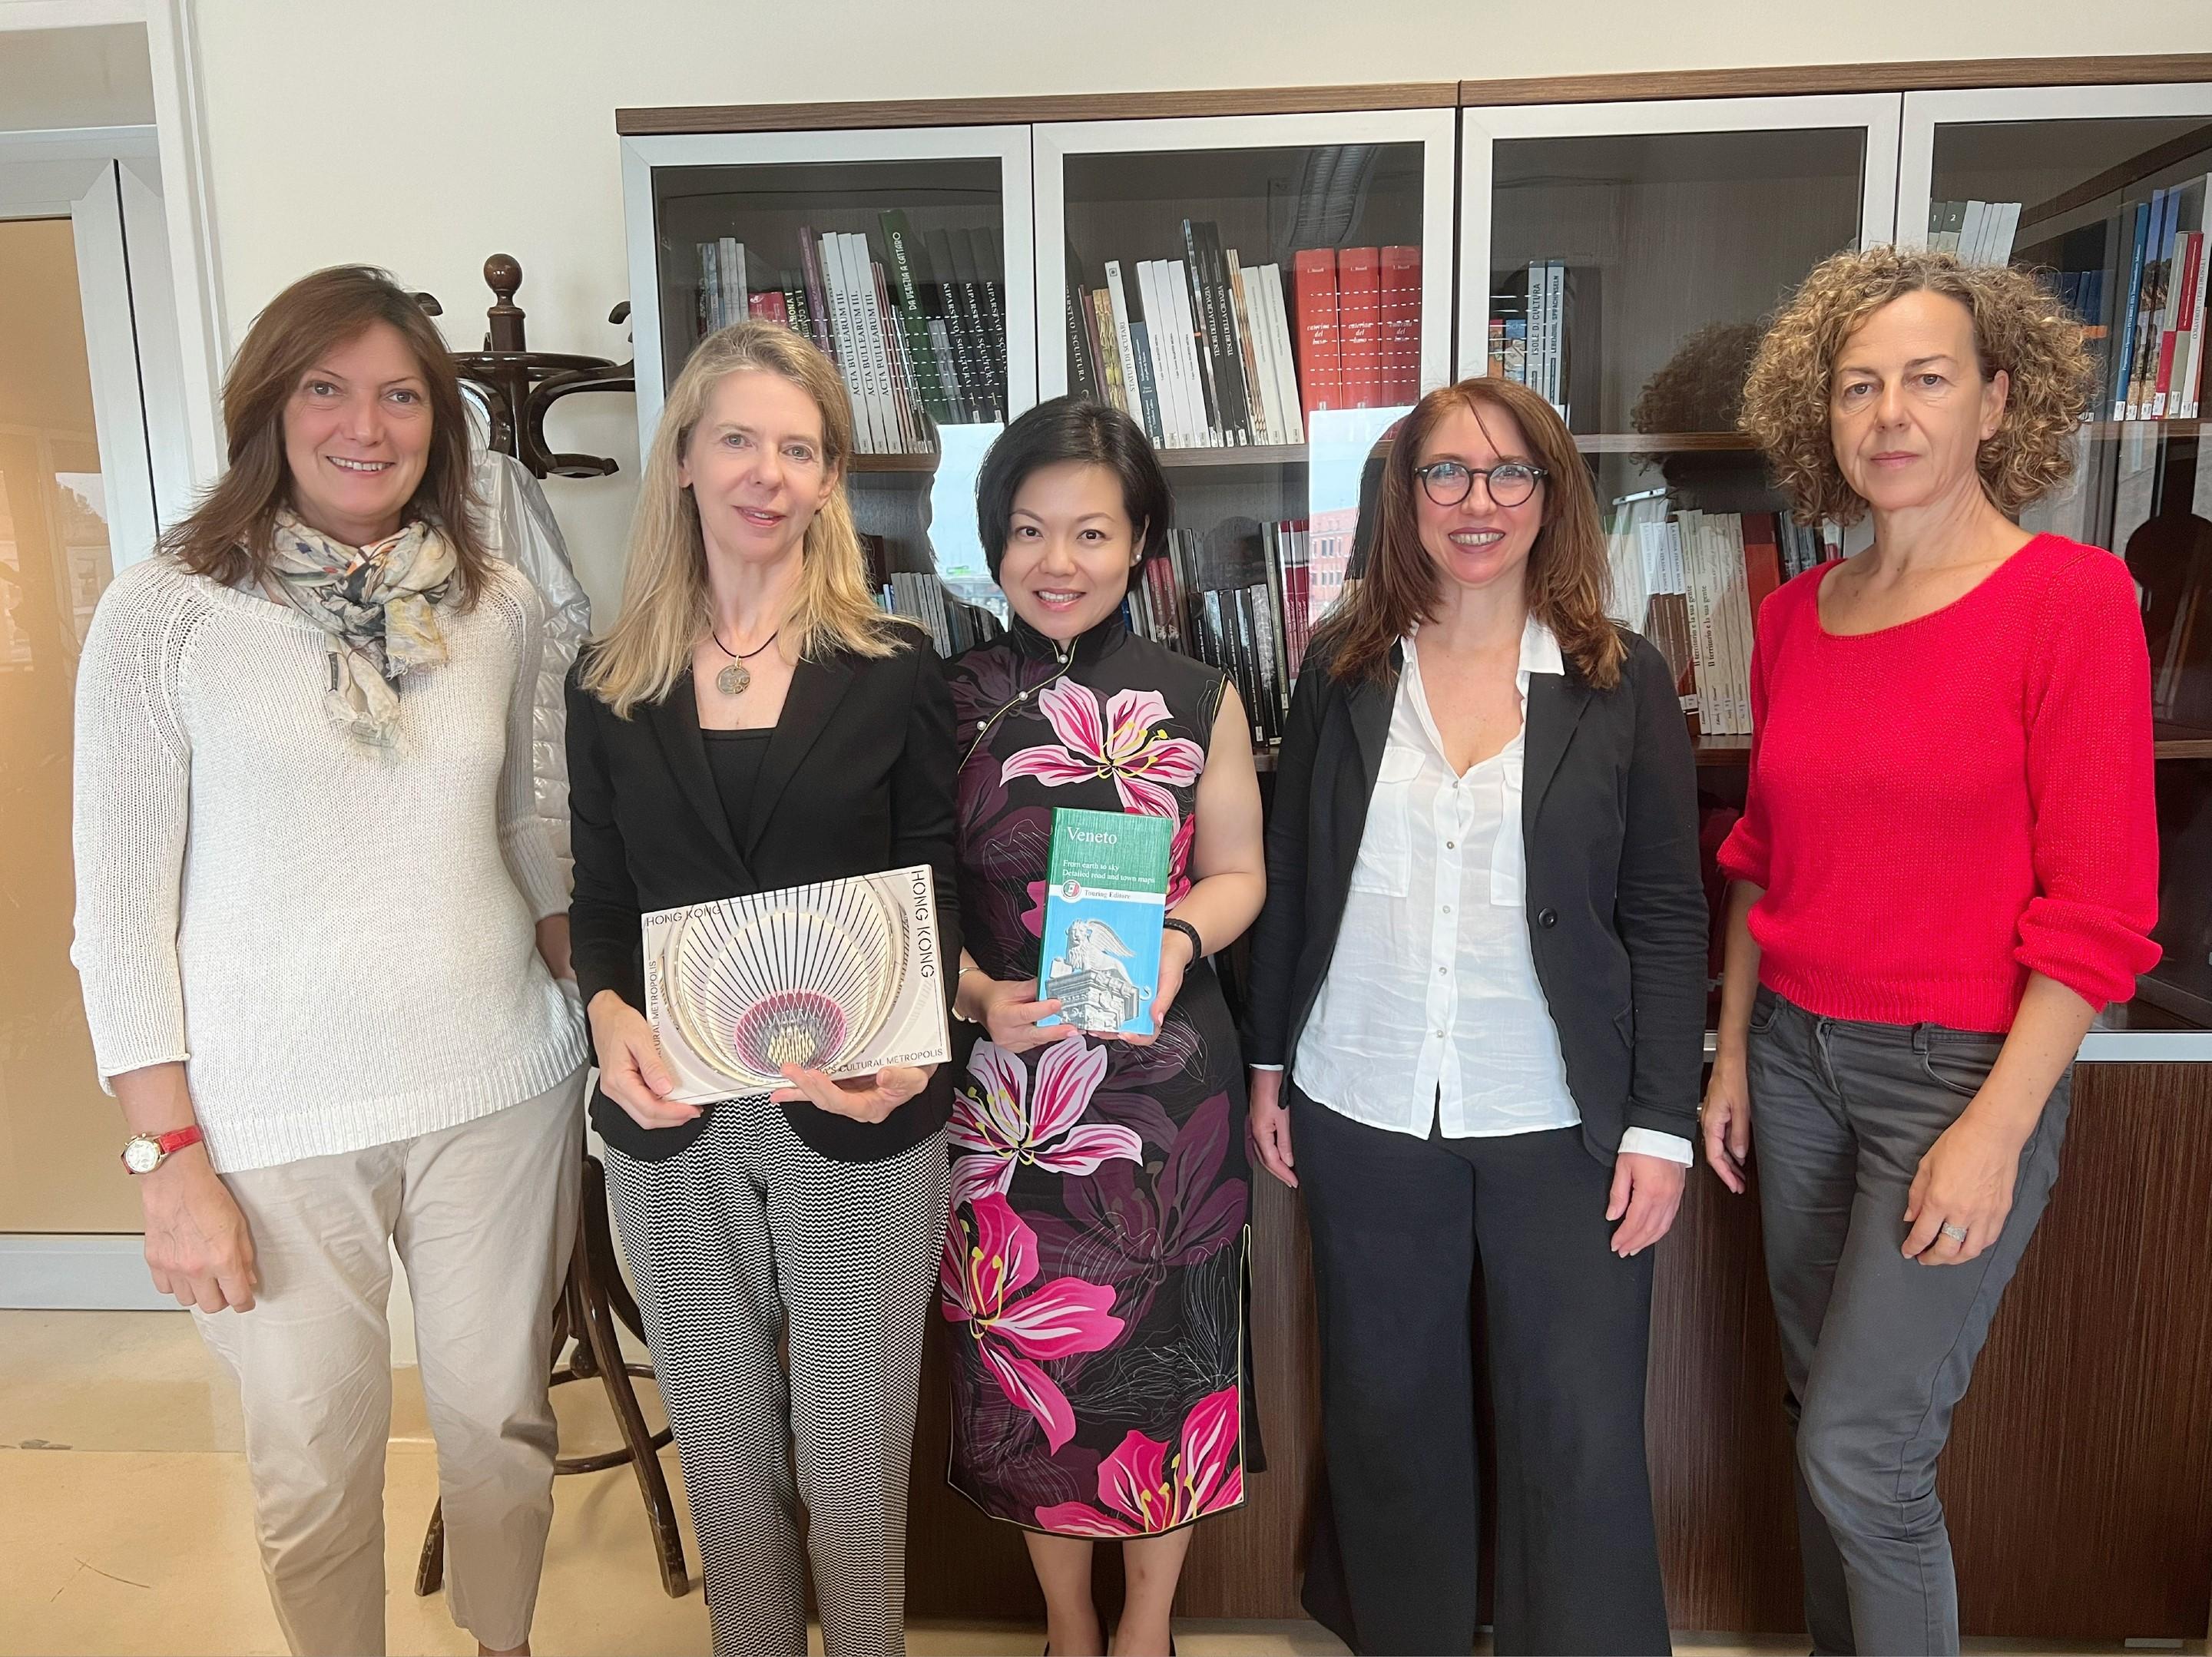 The Deputy Secretary for Culture, Sports and Tourism, Mrs Vicki Kwok, led the Hong Kong Special Administrative Region delegation to visit the 59th International Art Exhibition in Venice, Italy, and met with representatives from the Veneto Region Government from October 8 to 10 (Venice time). Photo shows Mrs Kwok (centre); the Director of International Relations, Veneto Region Government, Ms Annalisa Bisson (second left); the Director of the Unit of Cultural Heritage and Services, Department of Cultural Heritage, Cultural Activities and Sport, Ms Valentina Galan (first left); and other local government representatives.